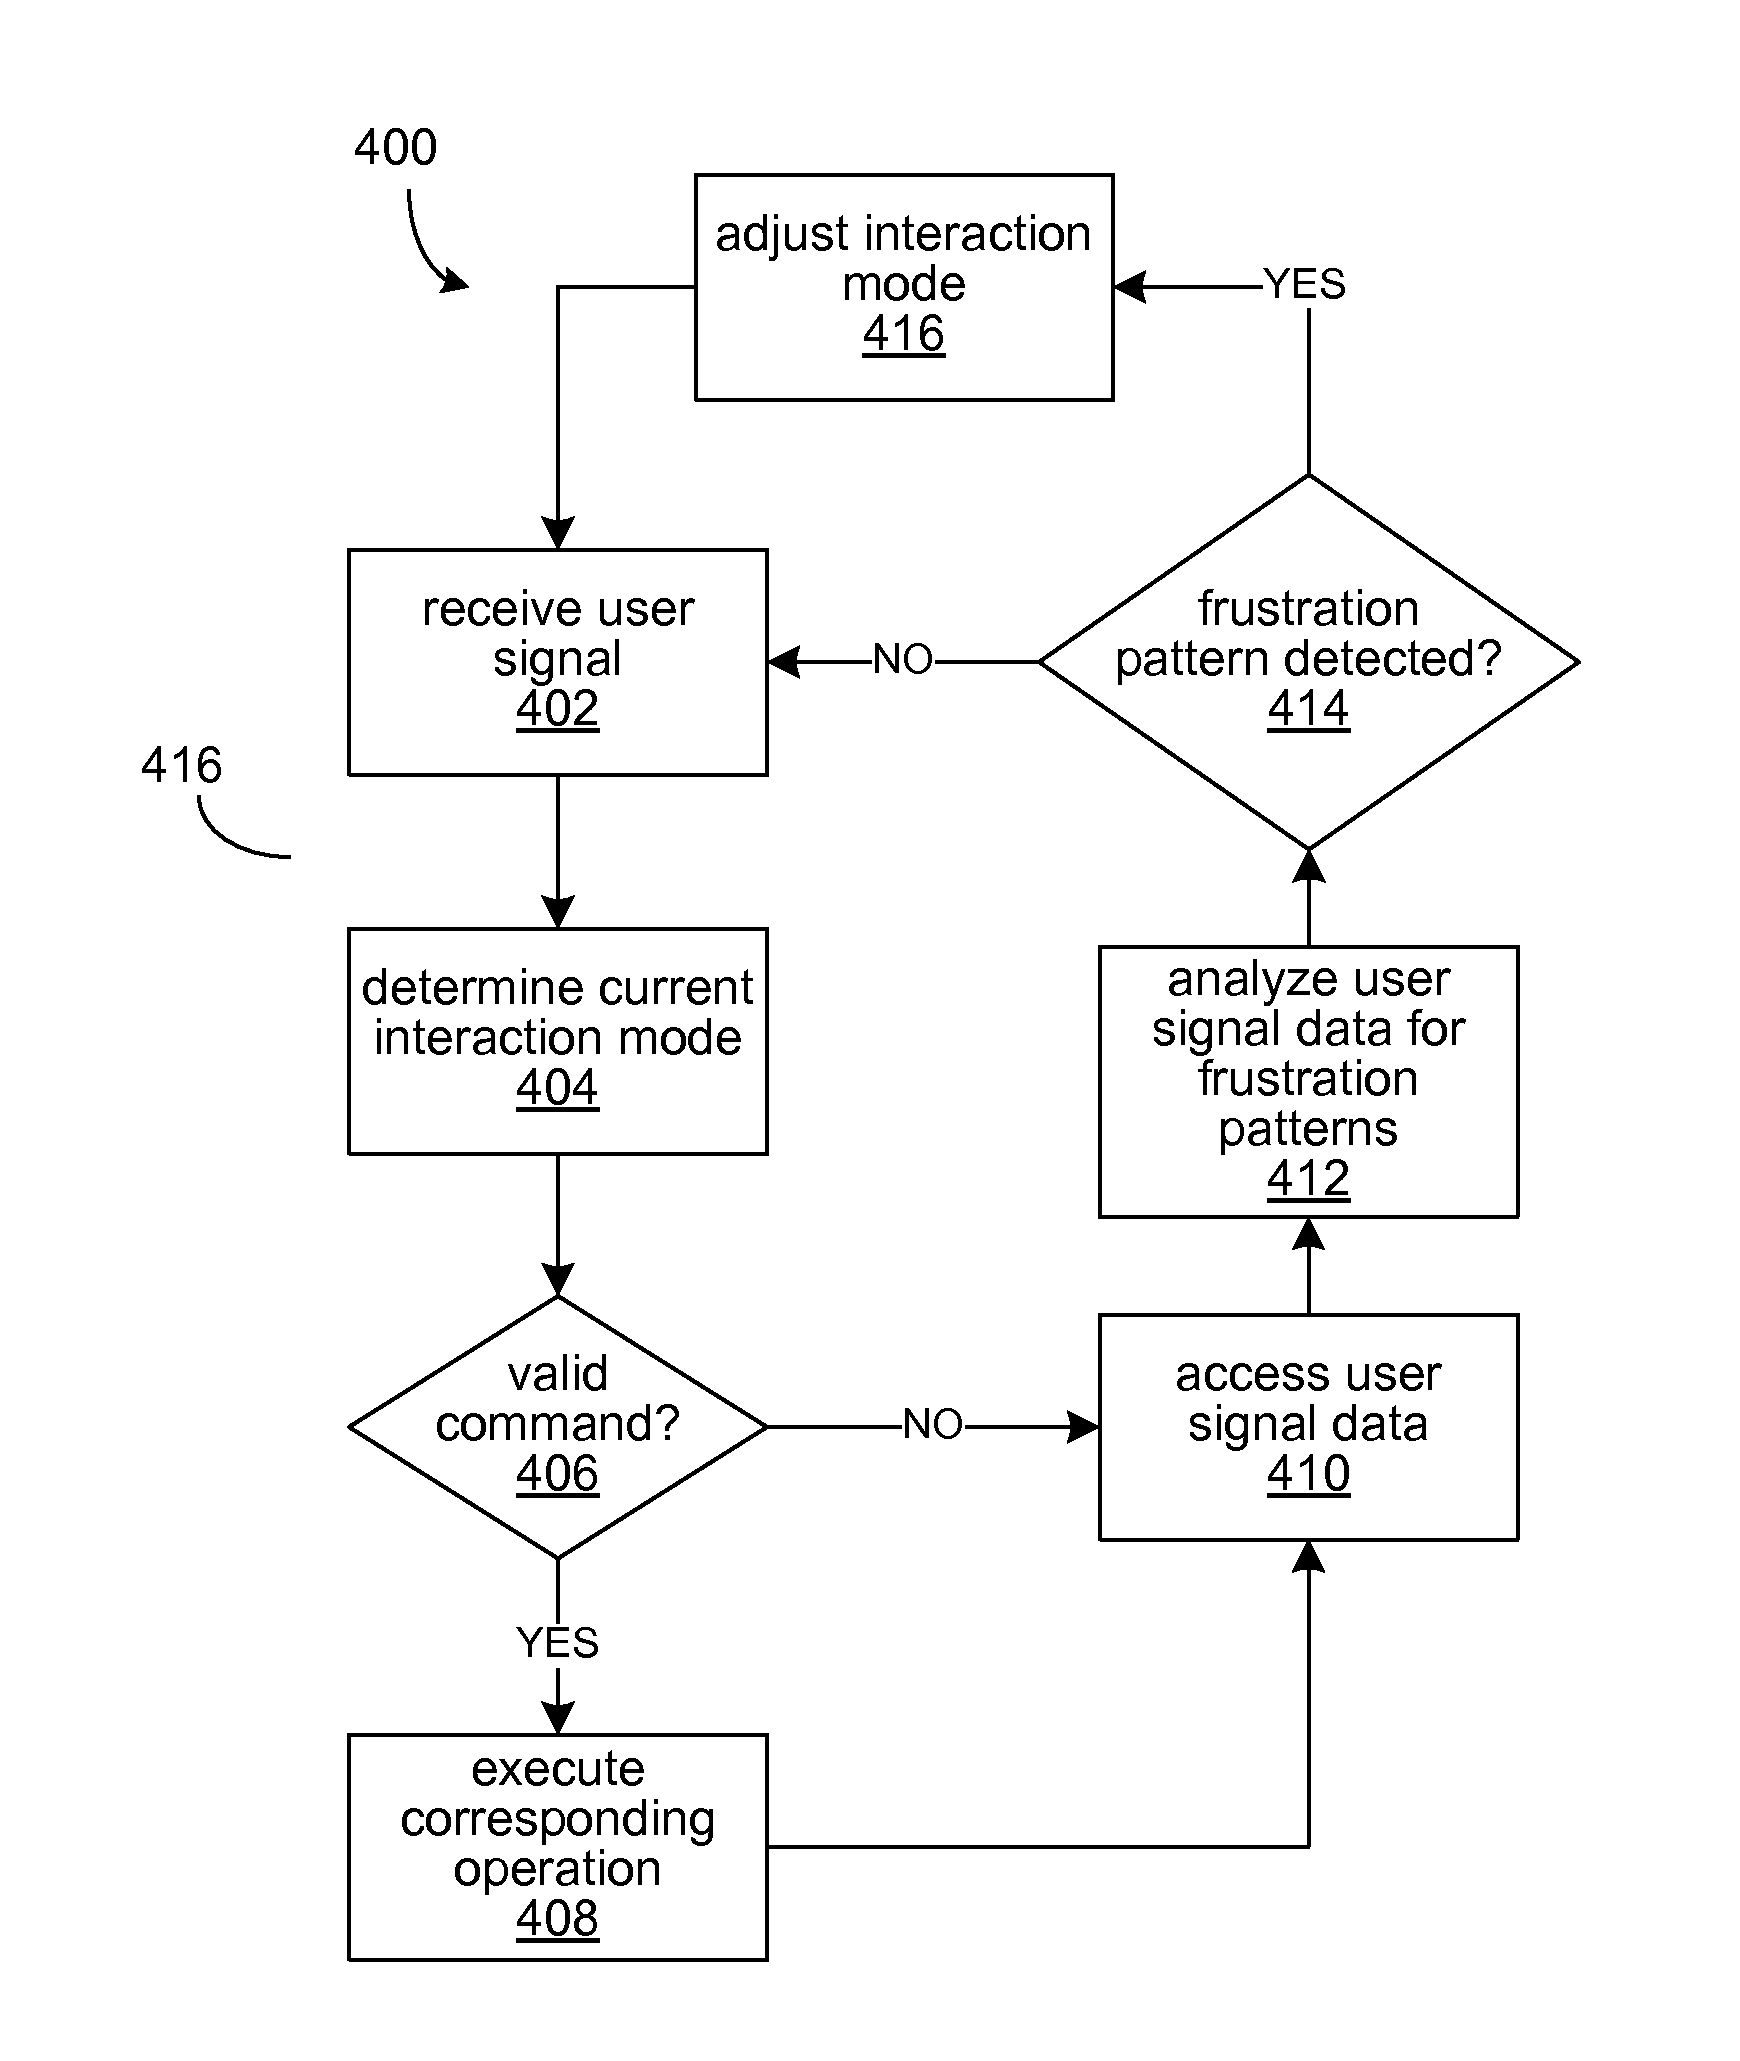 Systems and methods for monitoring motion sensor signals and adjusting interaction modes